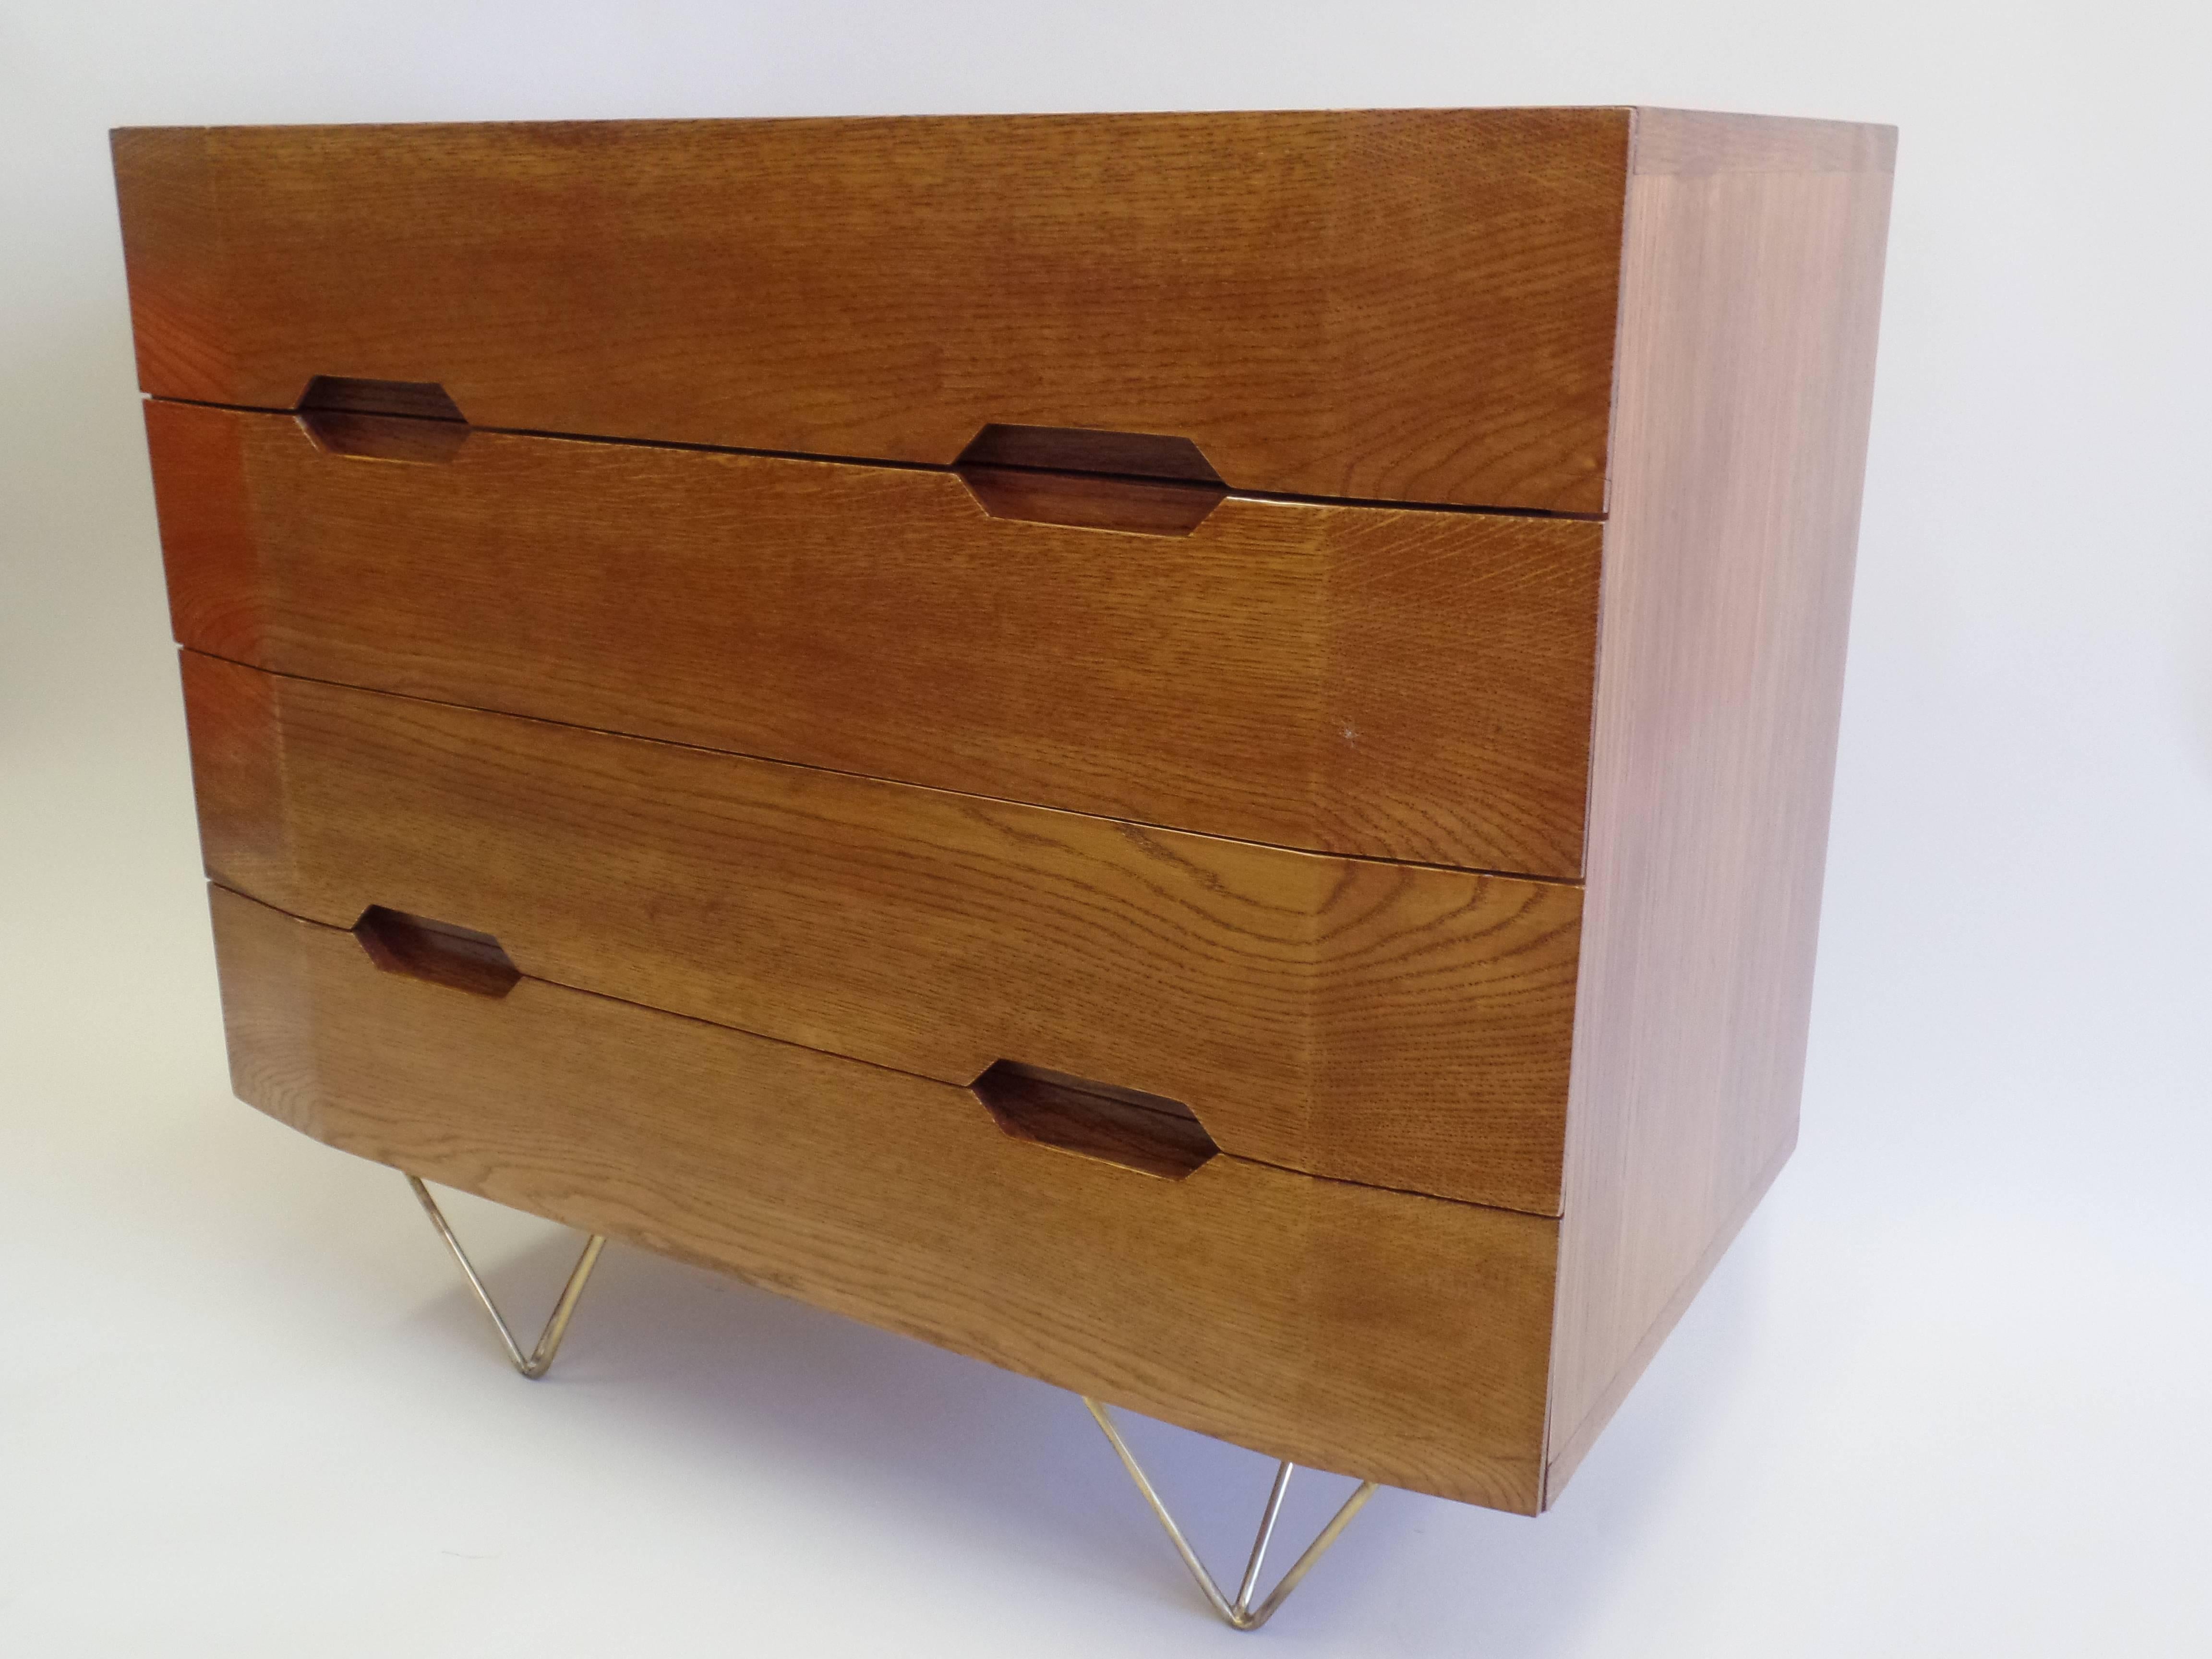 2 Italian Mid-Century Modern chests of drawers / dressers or commodes from the circle of Gio Ponti. Priced and sold individually.

The pieces are a mixture of exquisite form and subtle volumes suspended on tapered transparent brass tripod legs.